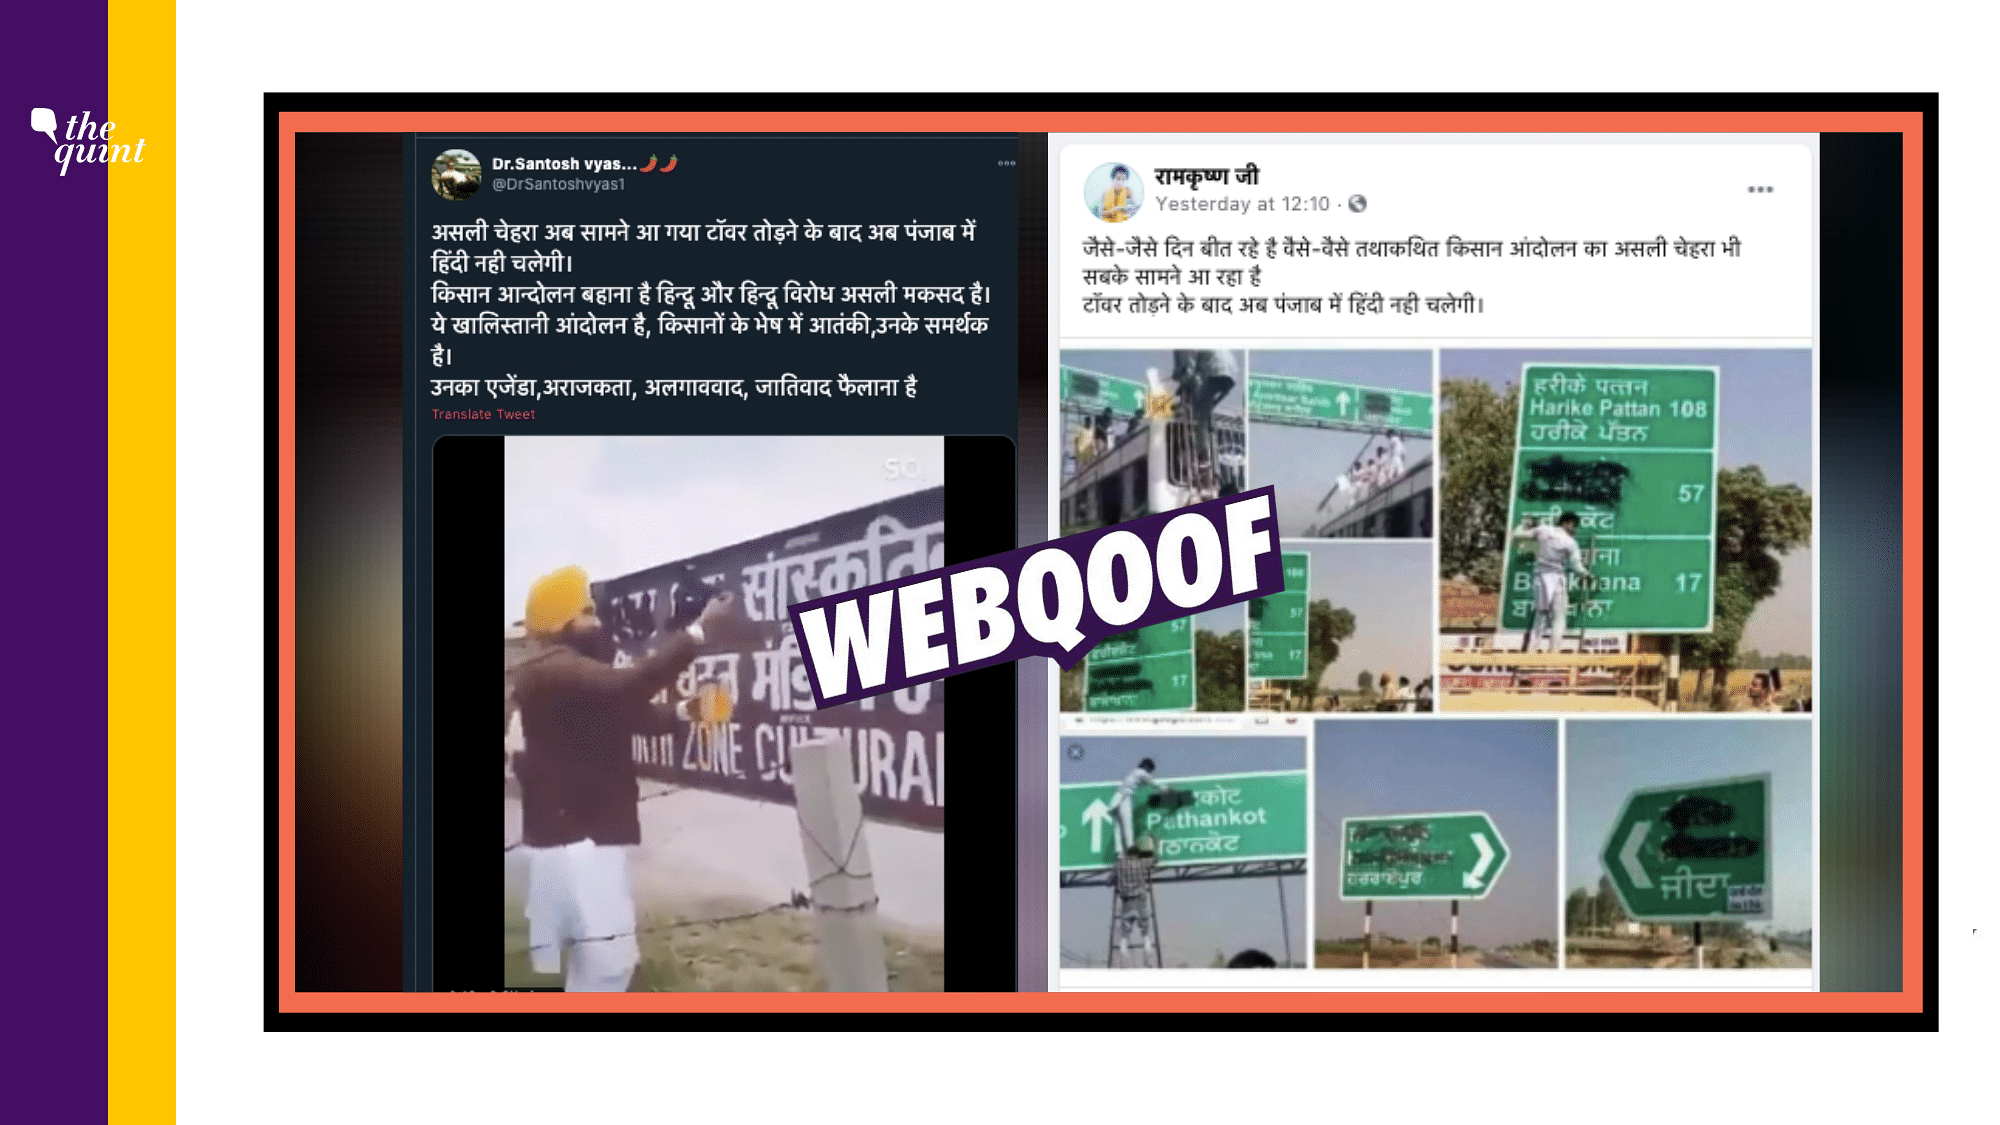 A set of video and images in which people can be seen tampering signboards with black paint, in Punjab, is being shared in connection with the farmers’ stir.